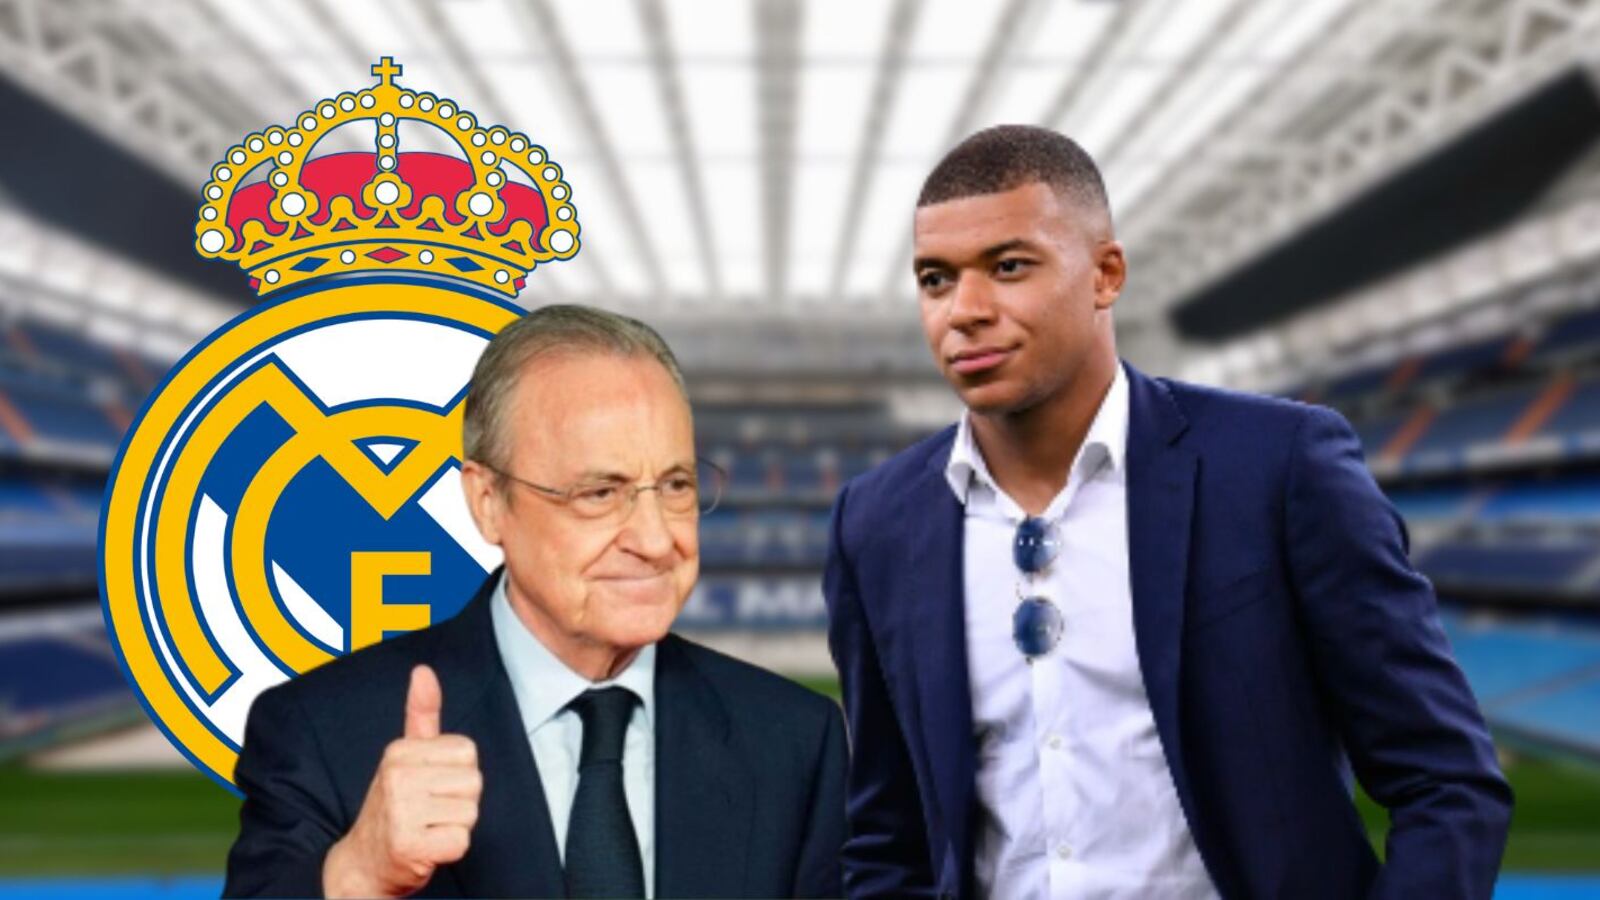 Mbappé's effect, the curious measure to be taken by Madrid due to Kylian's arrival at Real Madrid